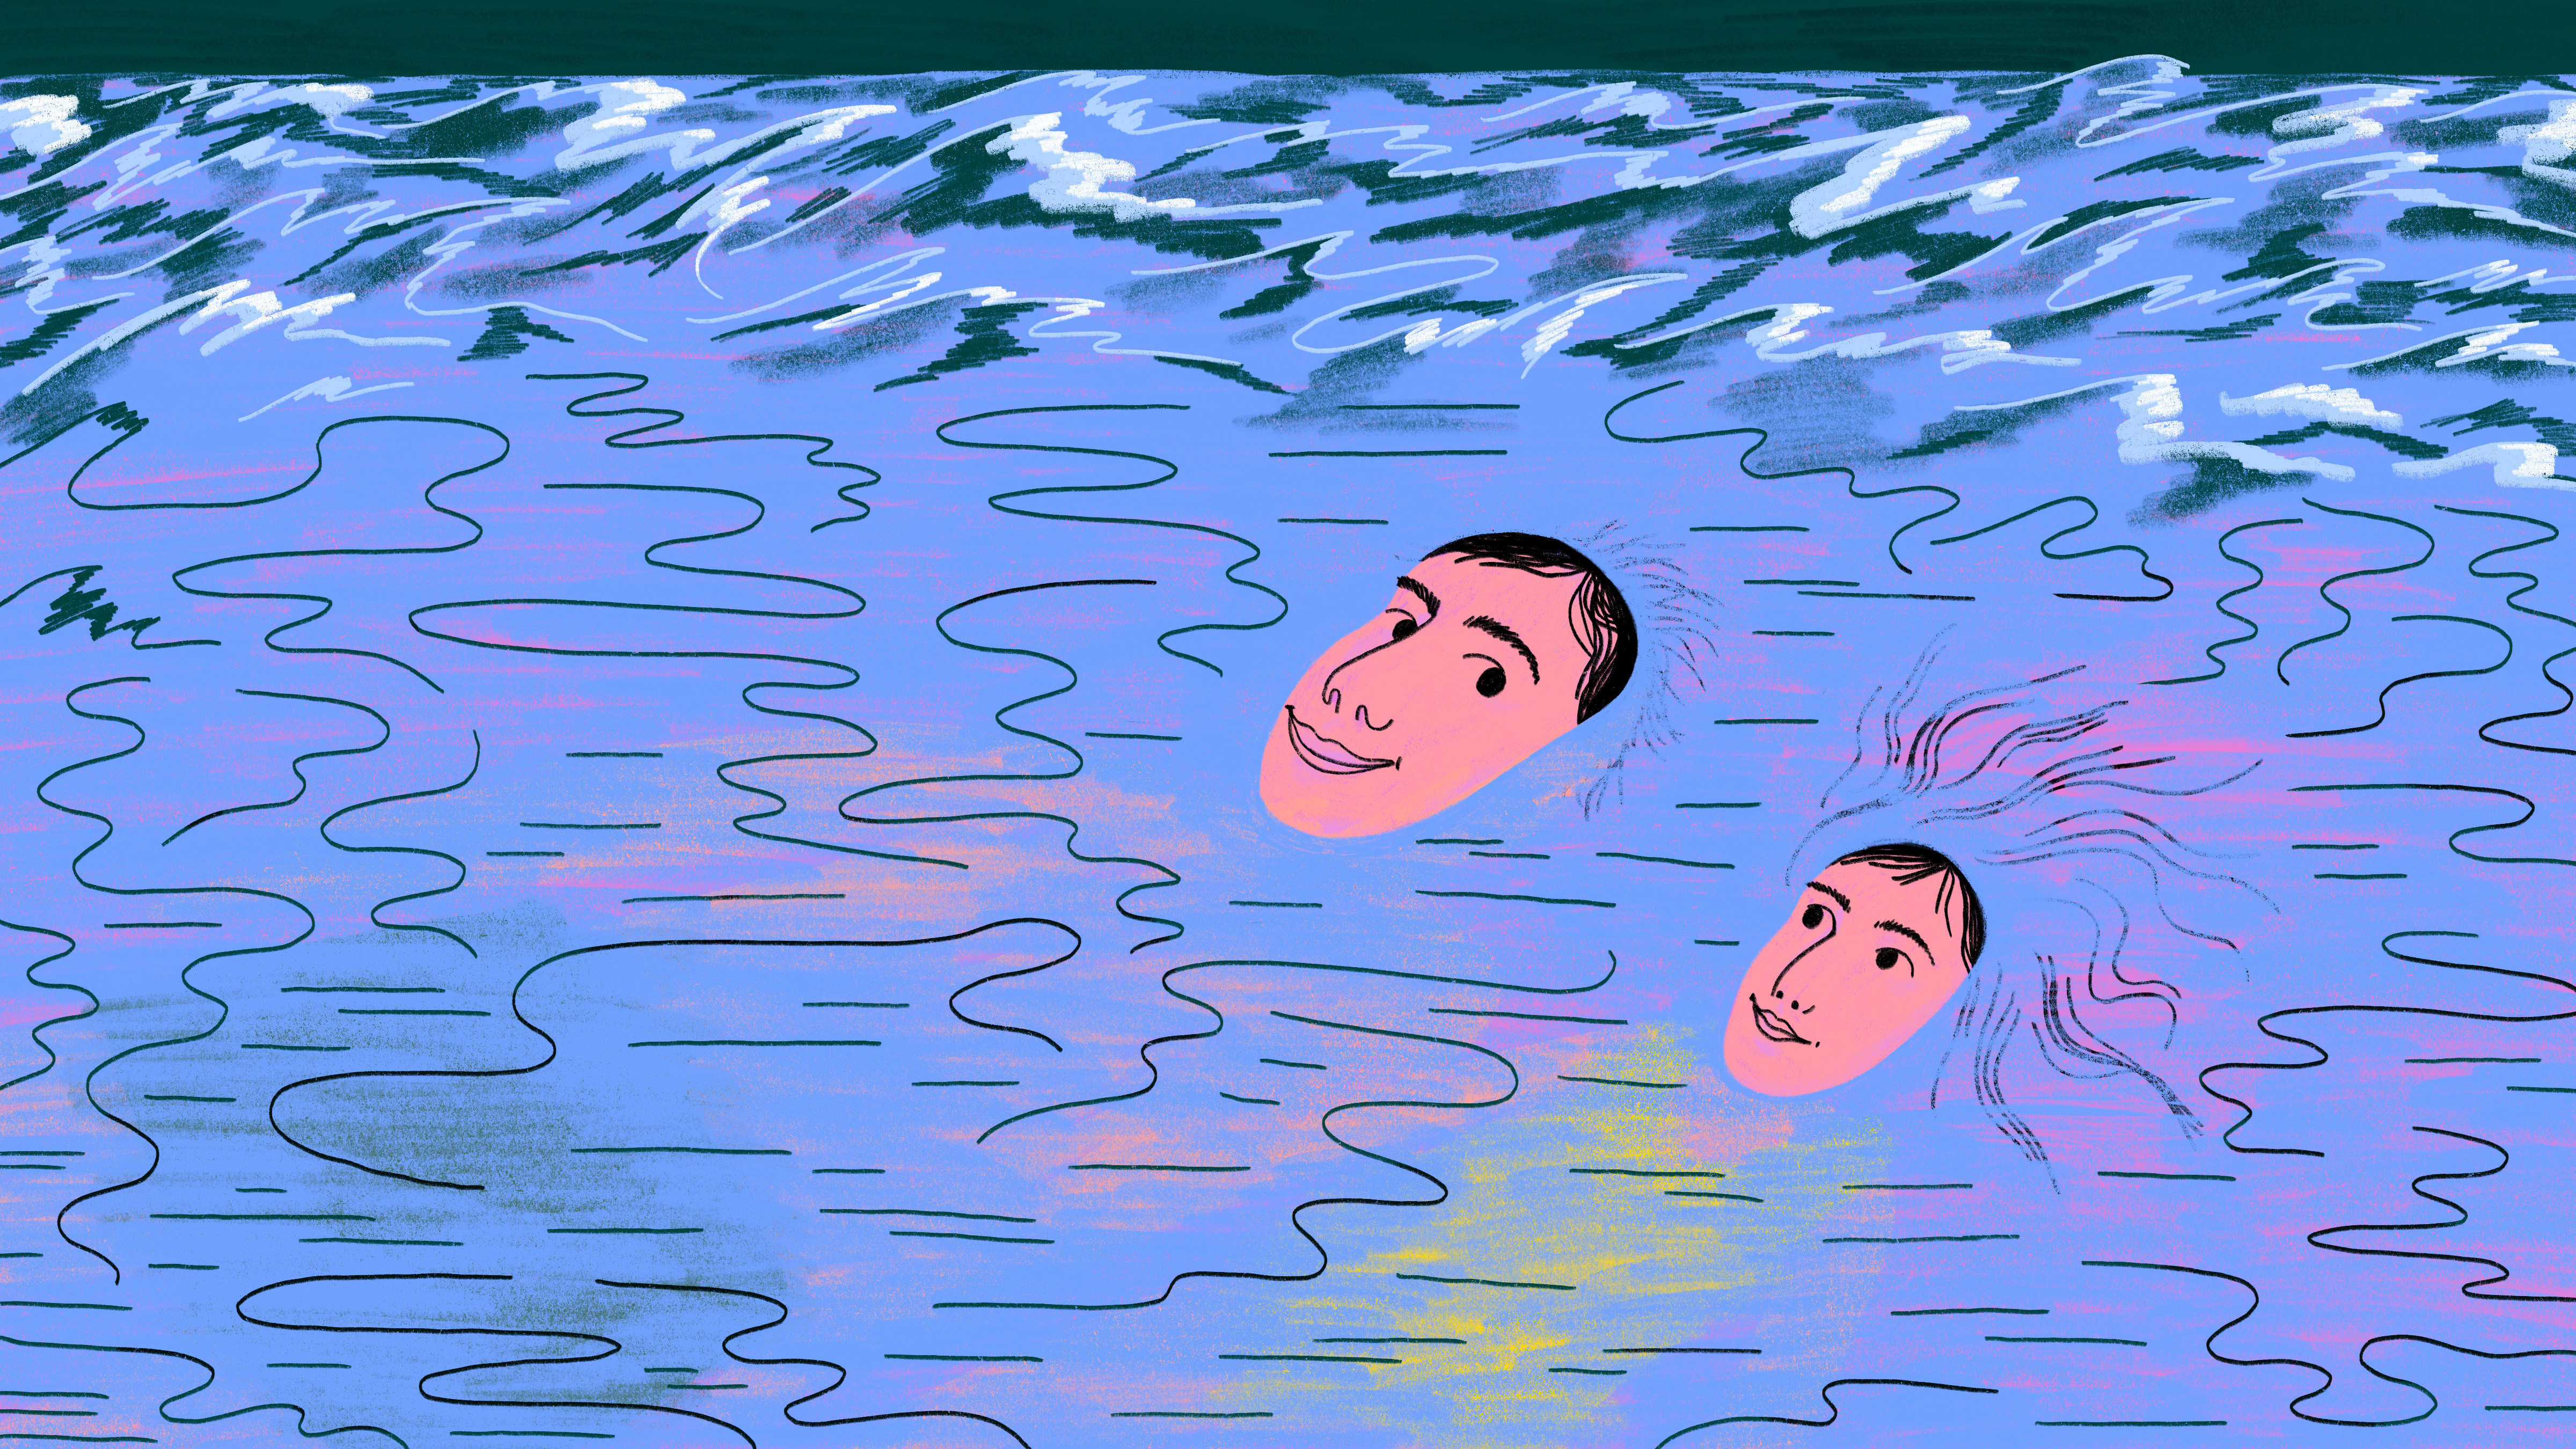 An illustration of a parent and child floating in water together on their backs, waves in the background.